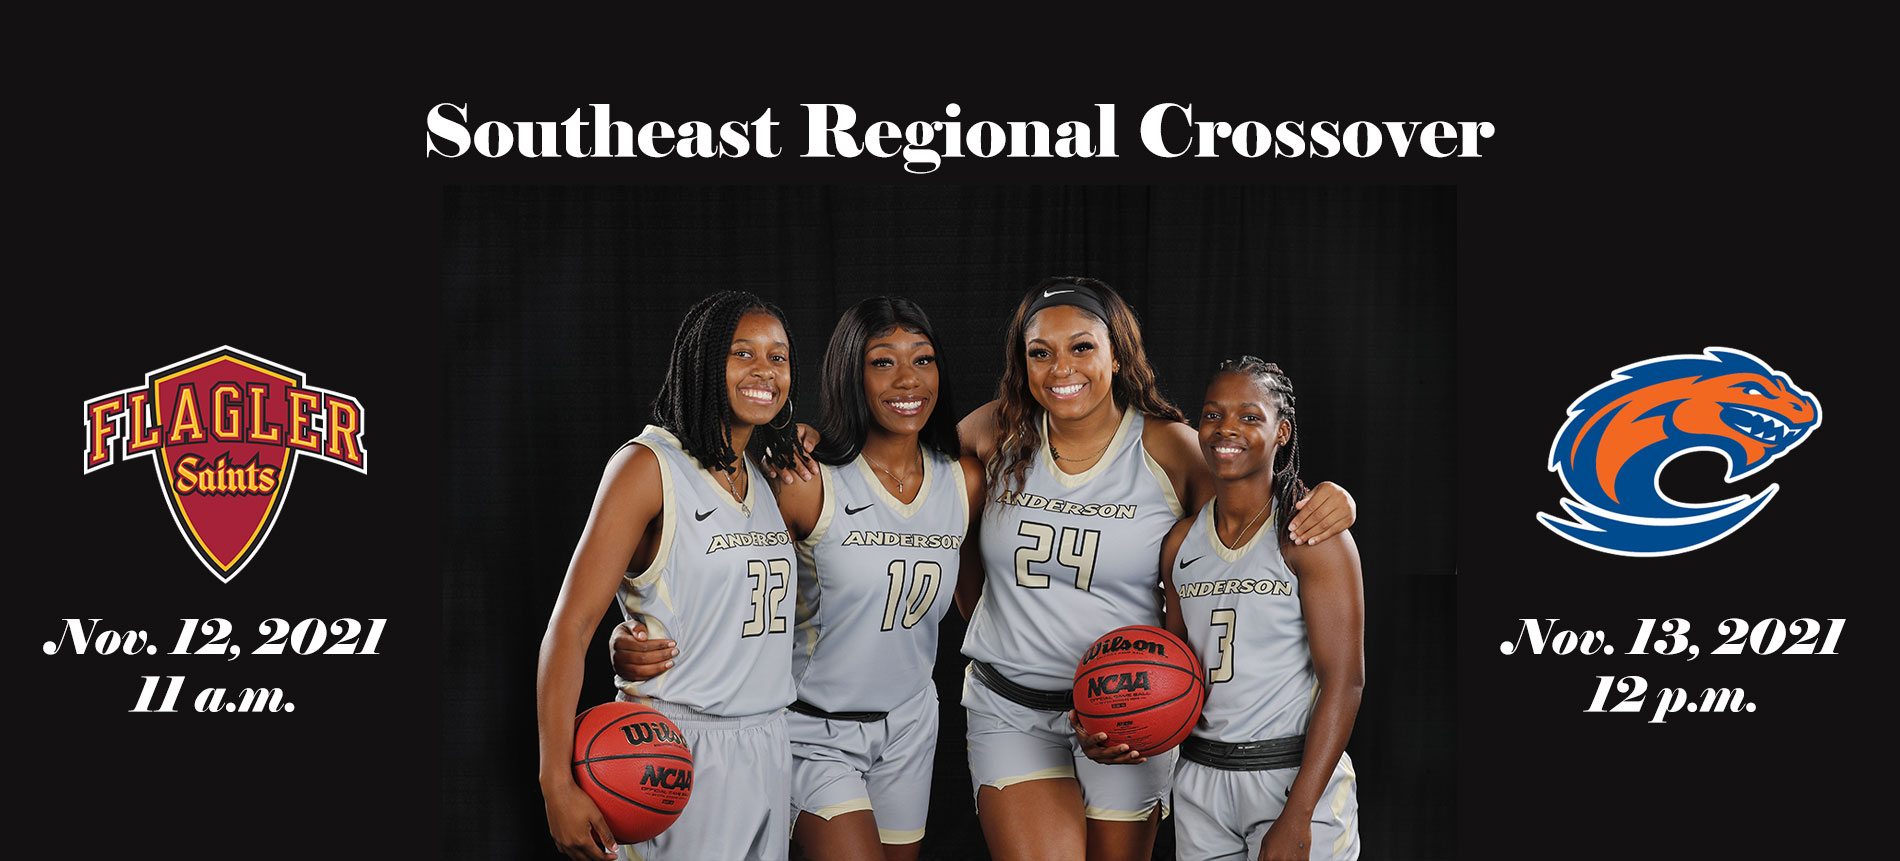 Women's Basketball Begins 2021-22 Campaign At Southeast Regional Crossover; Game Notes Released